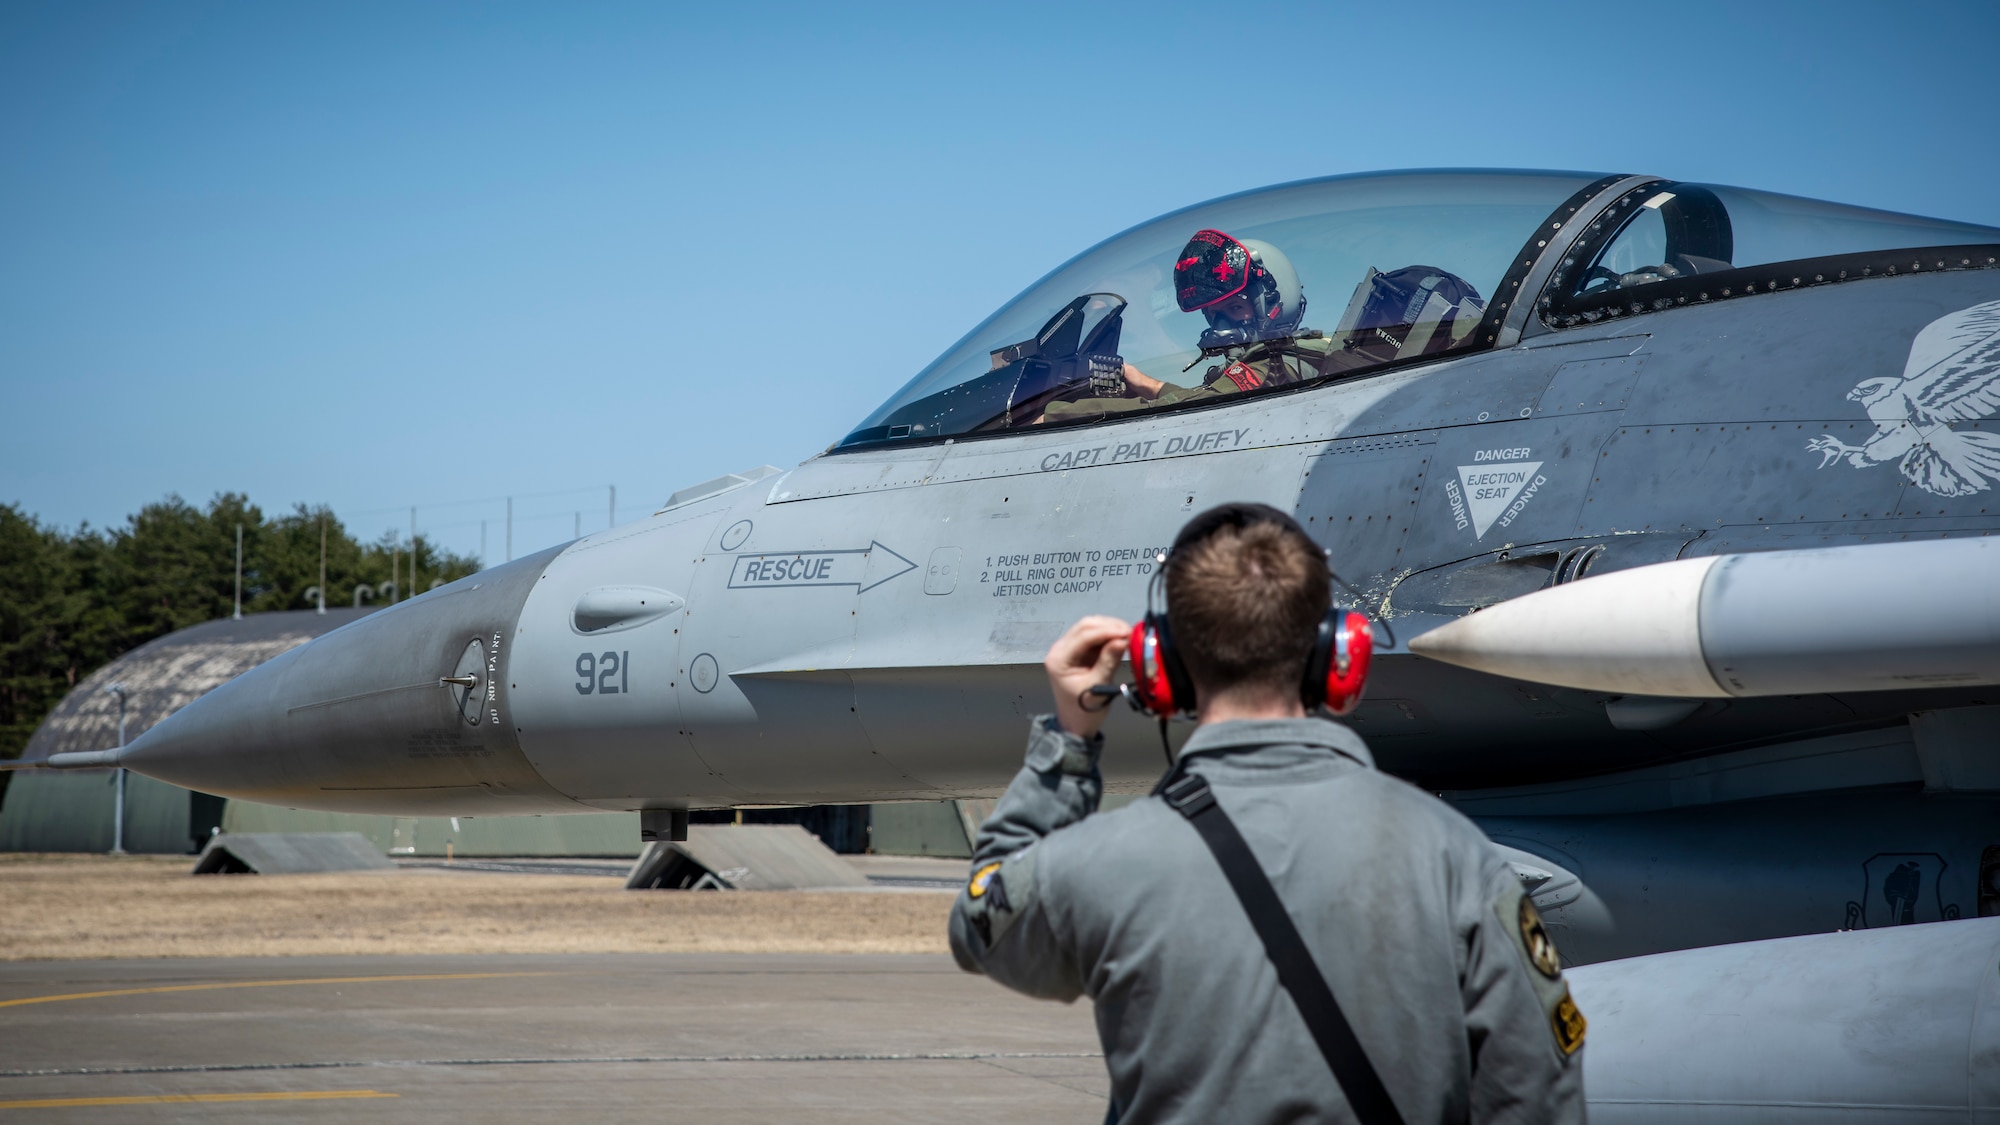 U.S. Air Force Senior Airman Kyle Greyshock, a 13th Fighter Squadron avionics systems journeyman, talks to Capt. Reese Black, the 13th FS chief of mobility, via radio headset at Misawa Air Base, Japan, March 30, 2020. The F-16 is a compact, multi-role fighter aircraft that has proven itself in air-to-air and air-to-surface attacks. Airmen are working around the clock ensuring aircraft are ready for flight training operations in order to promote a free and open Indo-Pacific. (U.S. Air Force photo by Airman 1st Class China M. Shock)